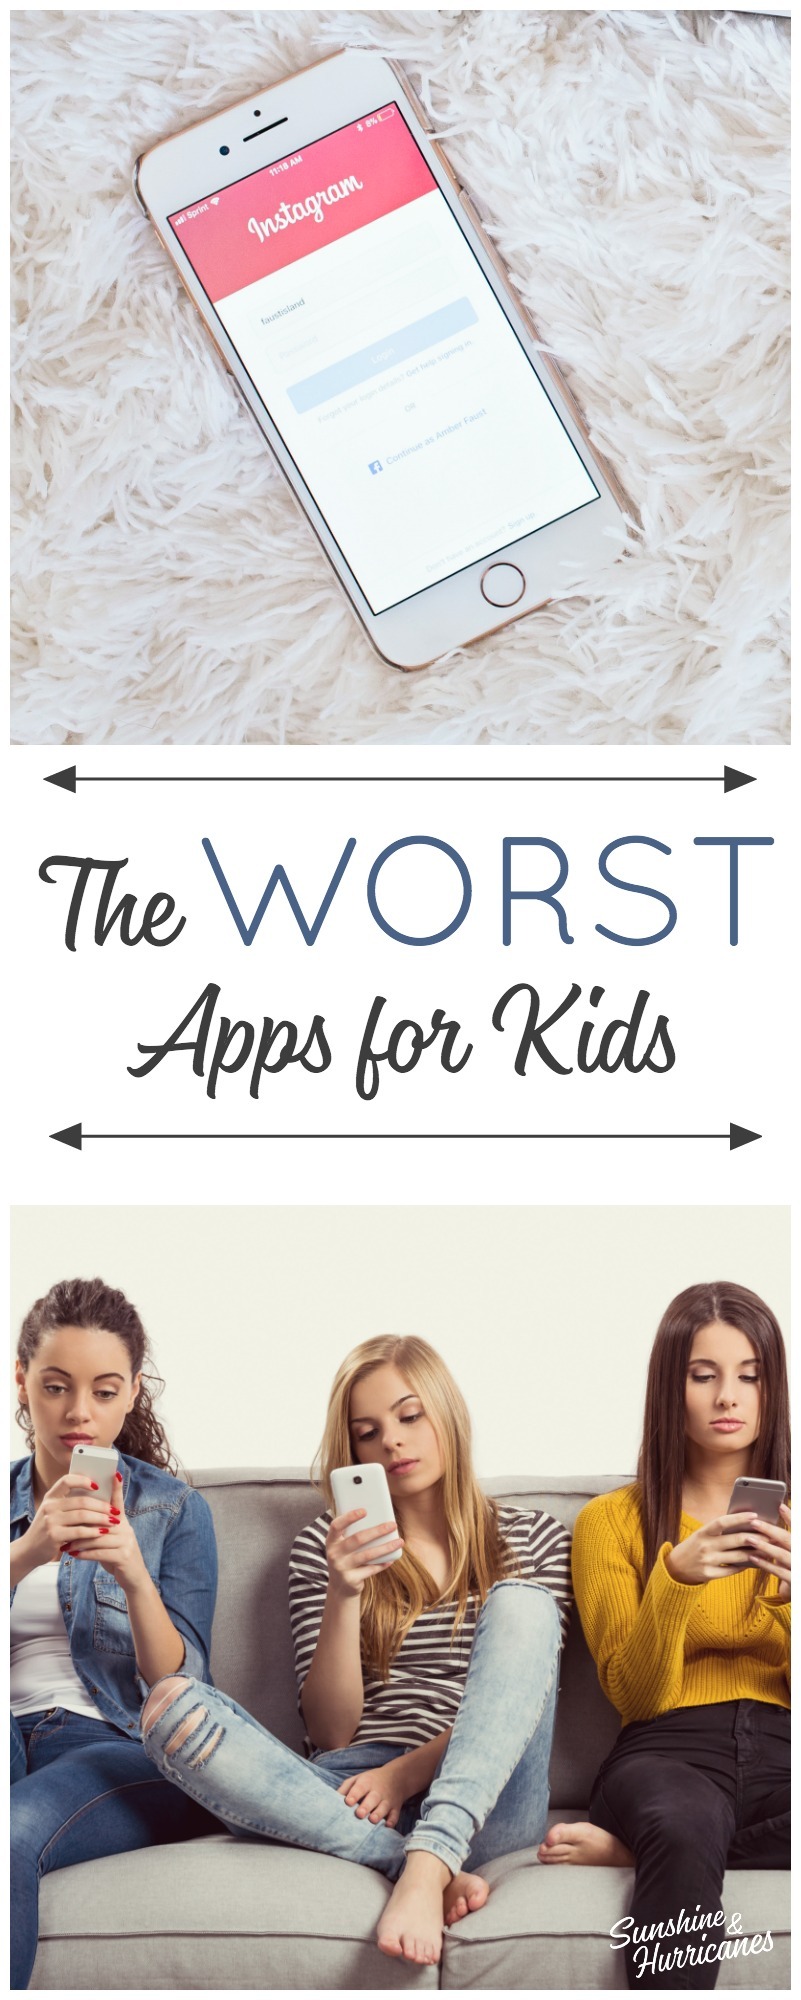 Do you know what apps are on your kids phones? There are many popular apps that put our kids at risk for bullying or child predators. It's important to be a smart and informed parent to keep your kids safe. Apps|Online Safety| Technology|Kids and Technology| Kids and Cellphones|Cell Phone Apps| Monitoring Apps